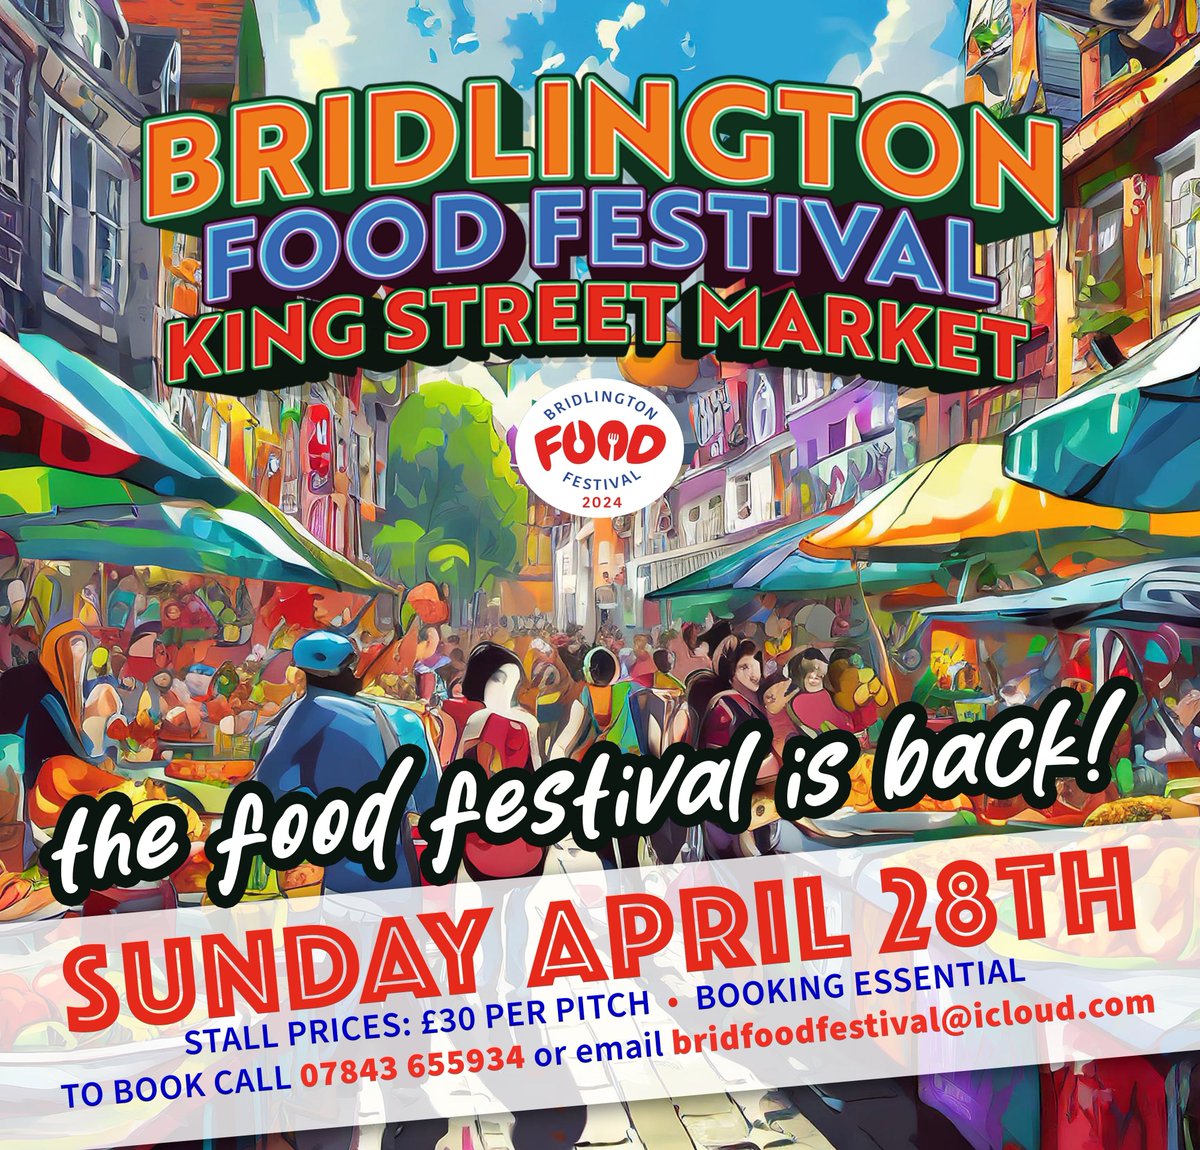 Get ready it's back first one of the year Bridlington food festival 50 stalls attending various food stalls attending. #bridlington #foodfestival #foodies #foodgloriousfood #market #shoplocal #supportsmallbusiness #eastcoast #cakes #foodstalls @RadioHumberside @nmtf